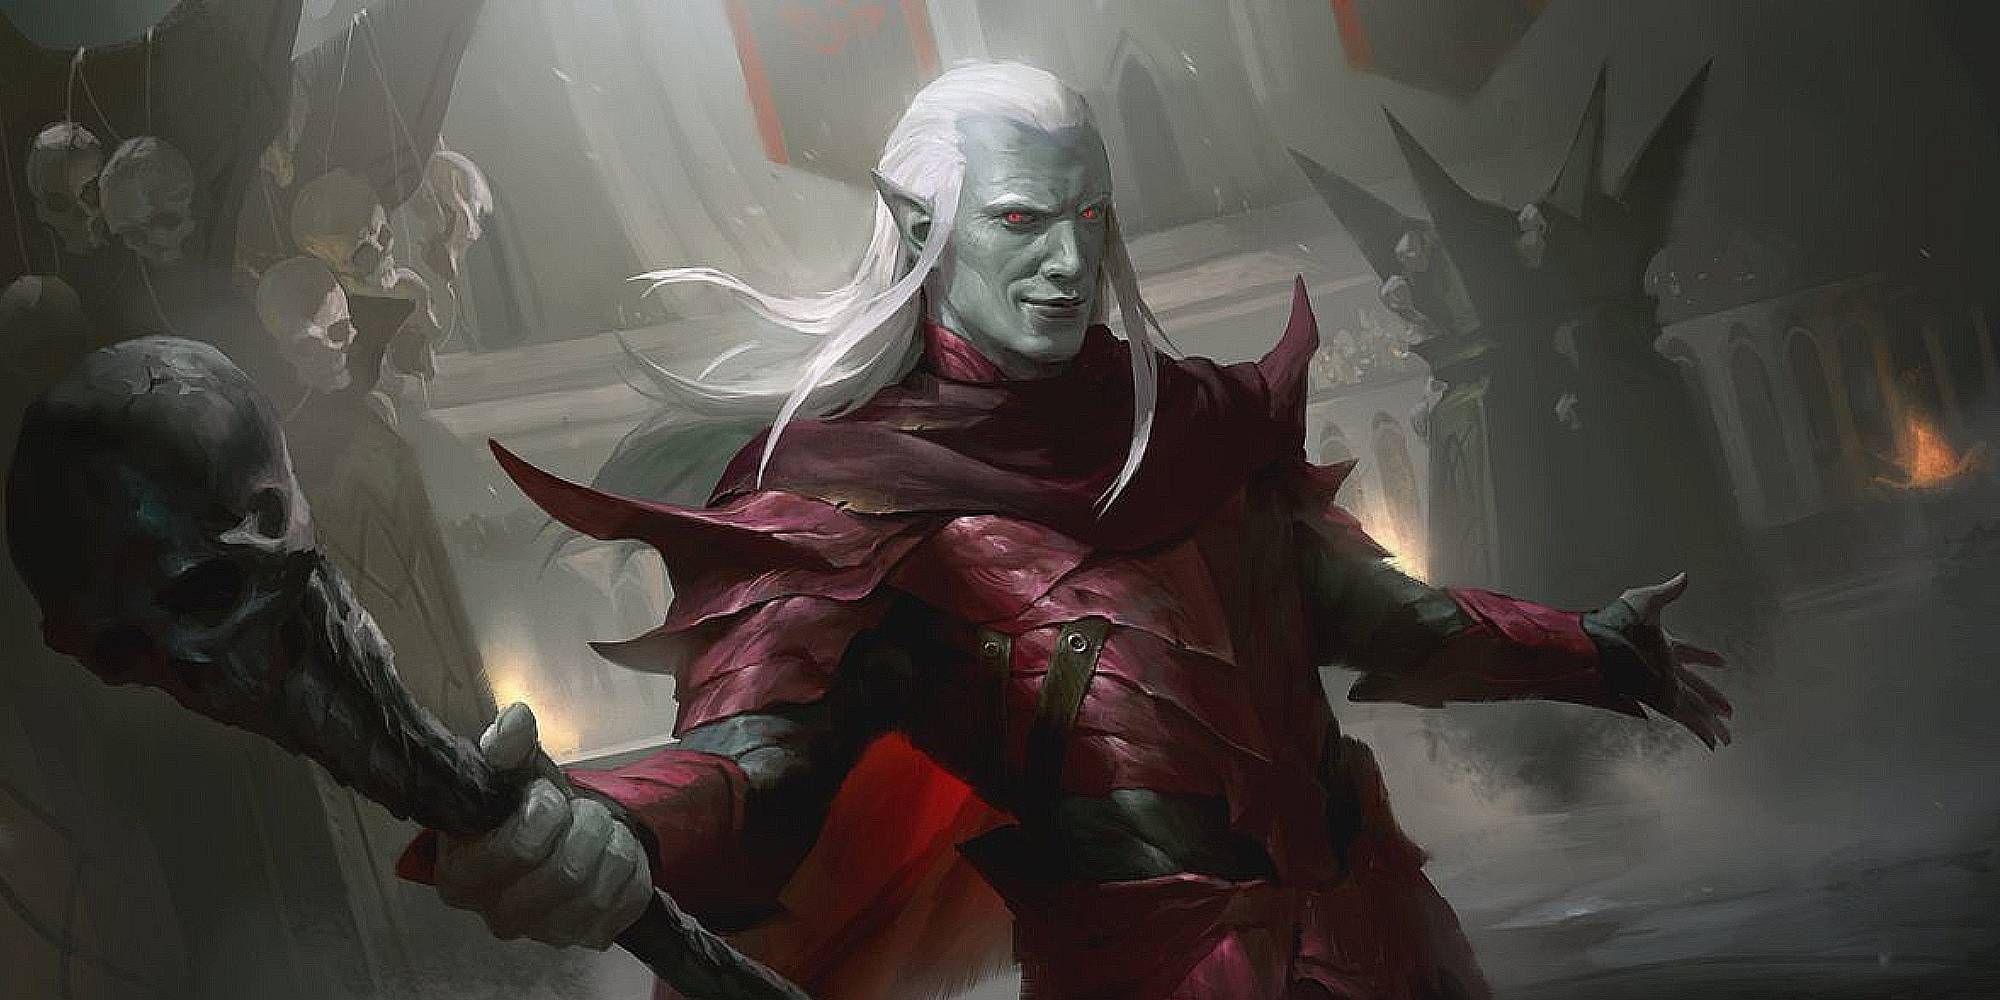 A Drow with long white hair and crimson leather armour holds a staff with a skull at the end as he smirks